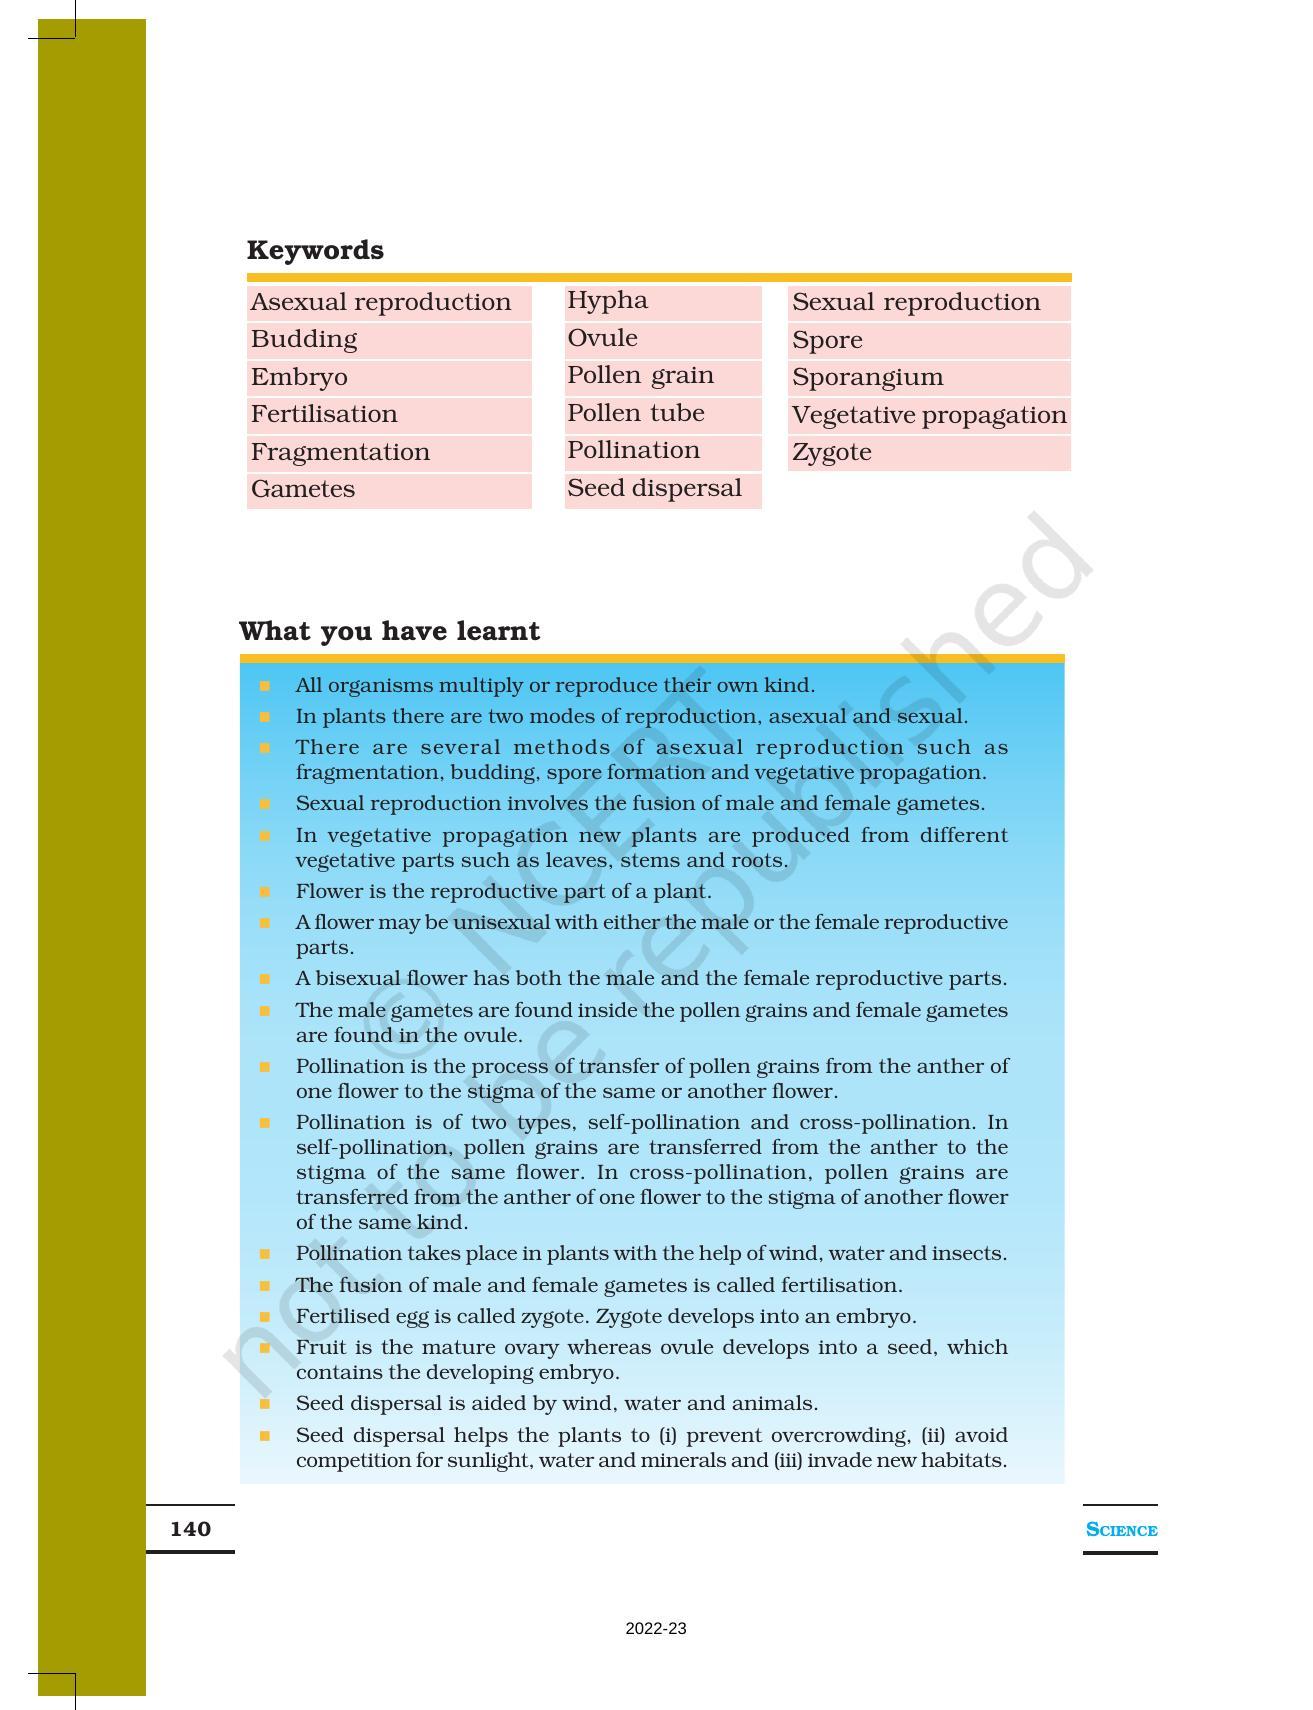 NCERT Book for Class 7 Science: Chapter 12-Reproduction in Plants - Page 8